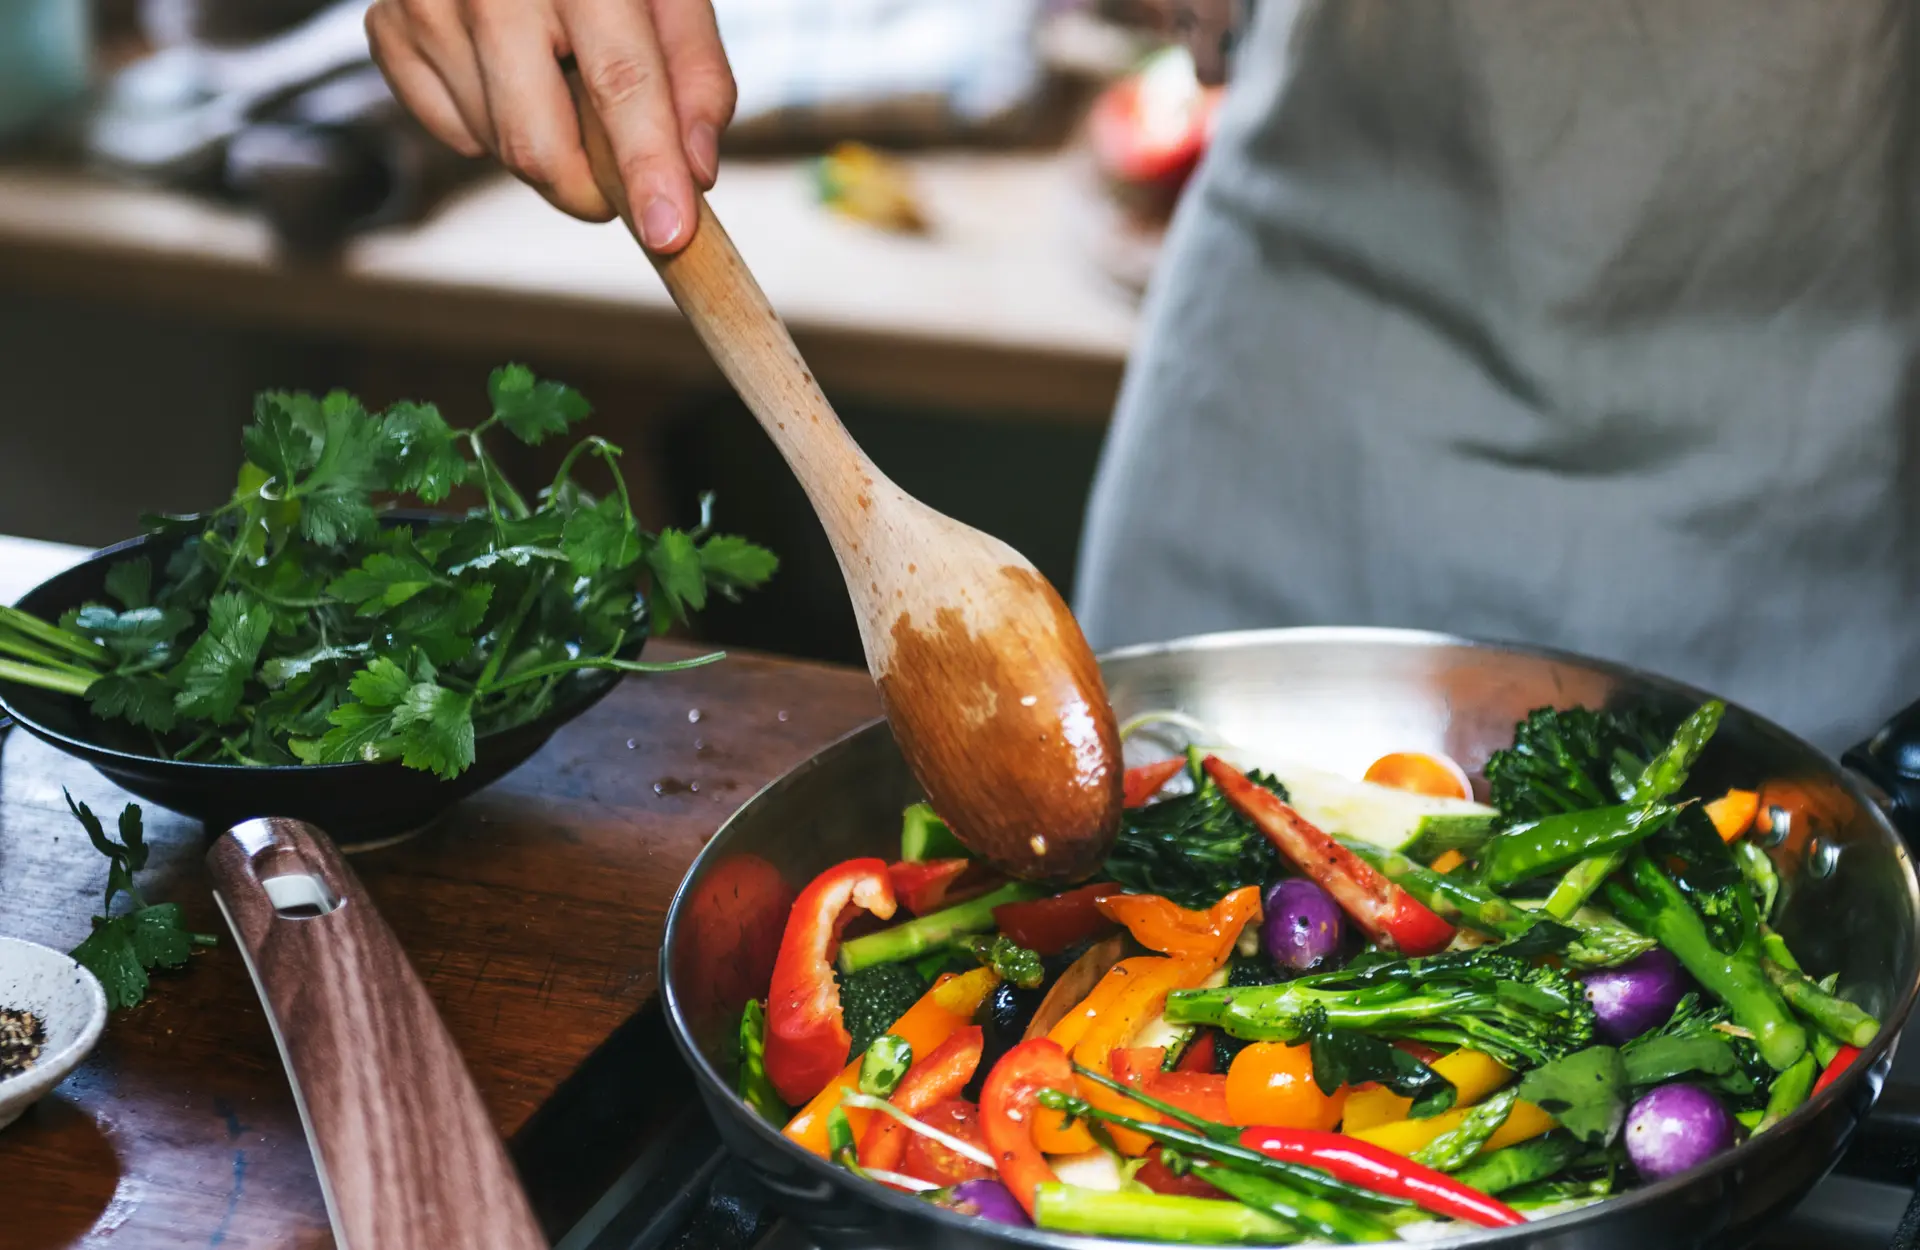 Sizzling vegetables in a frying pan, expertly stirred with a wooden spoon.